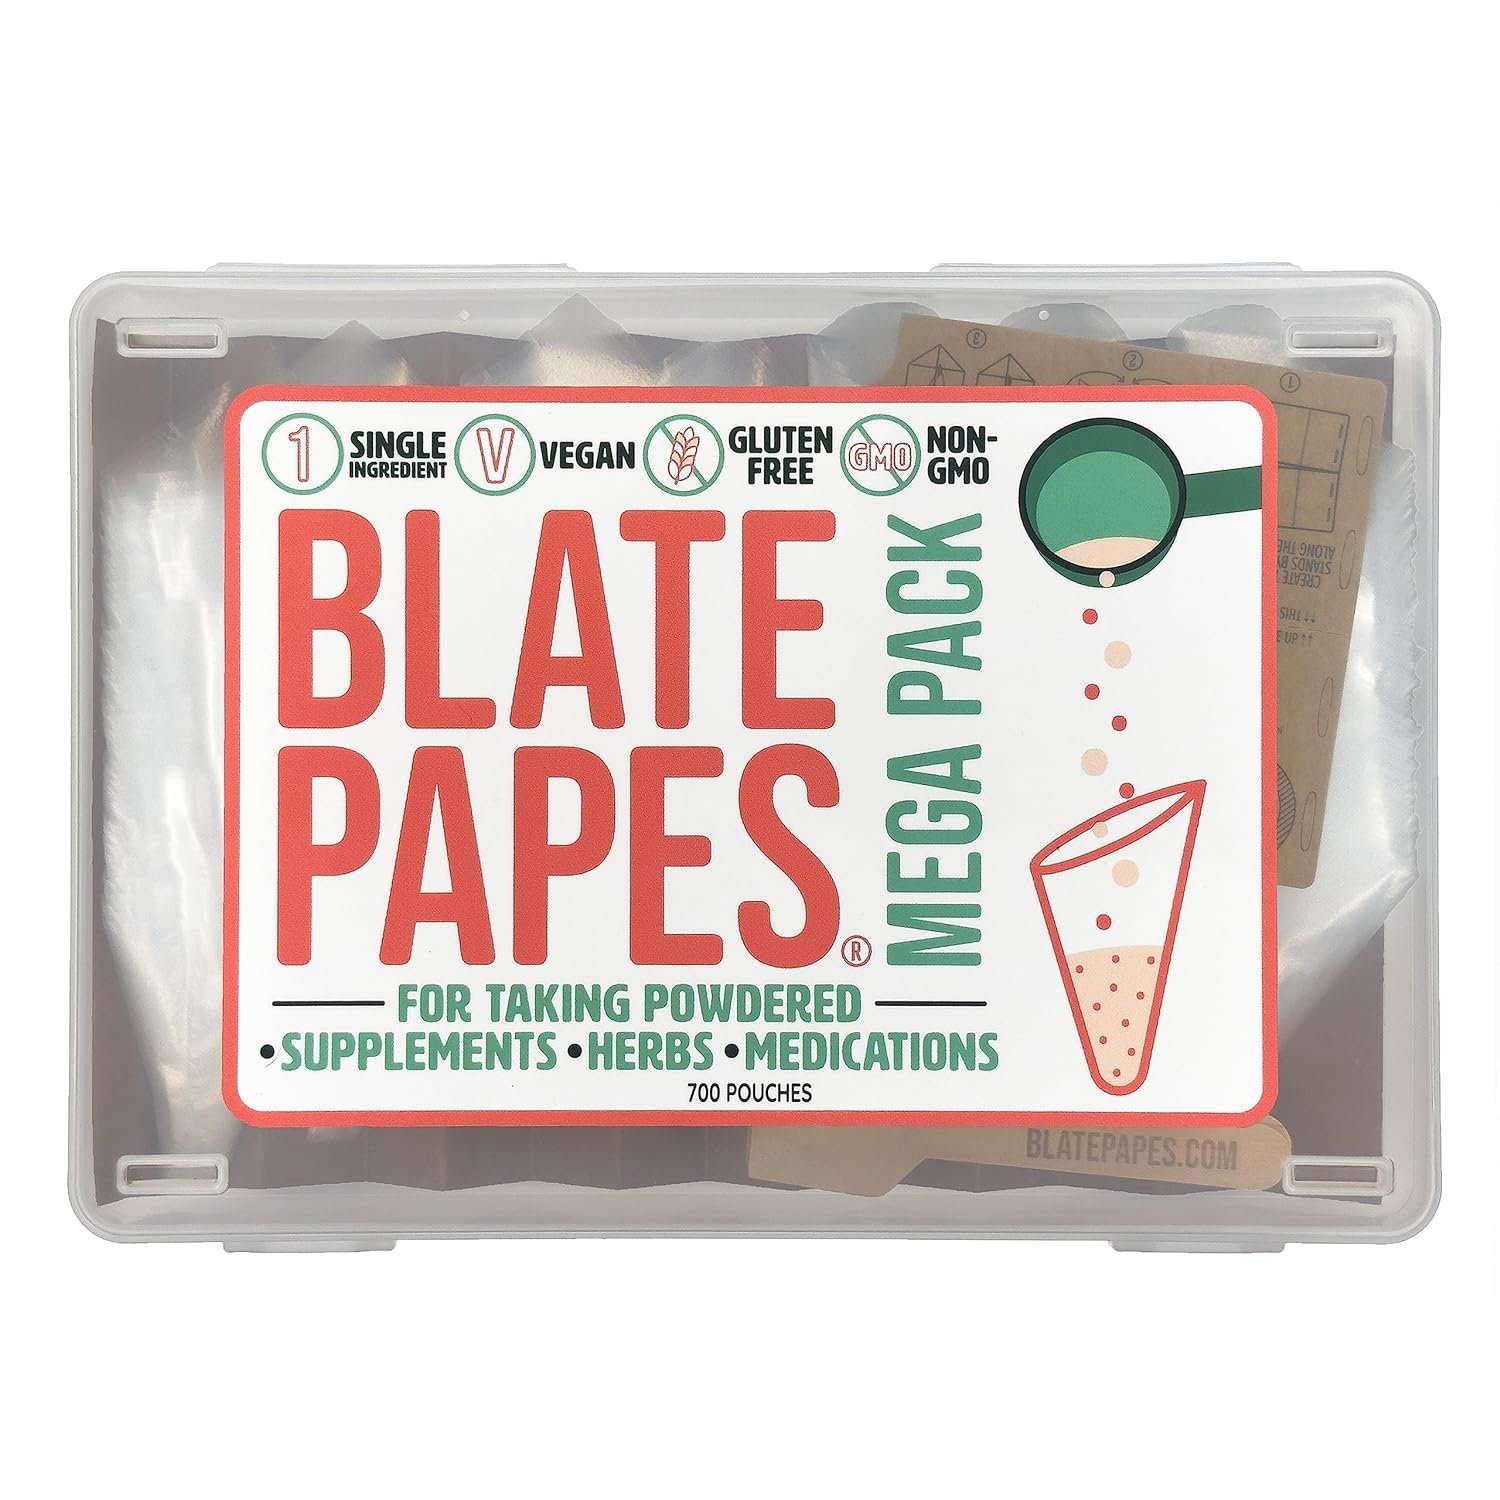 Blate Papes Pouches 700 Count Review